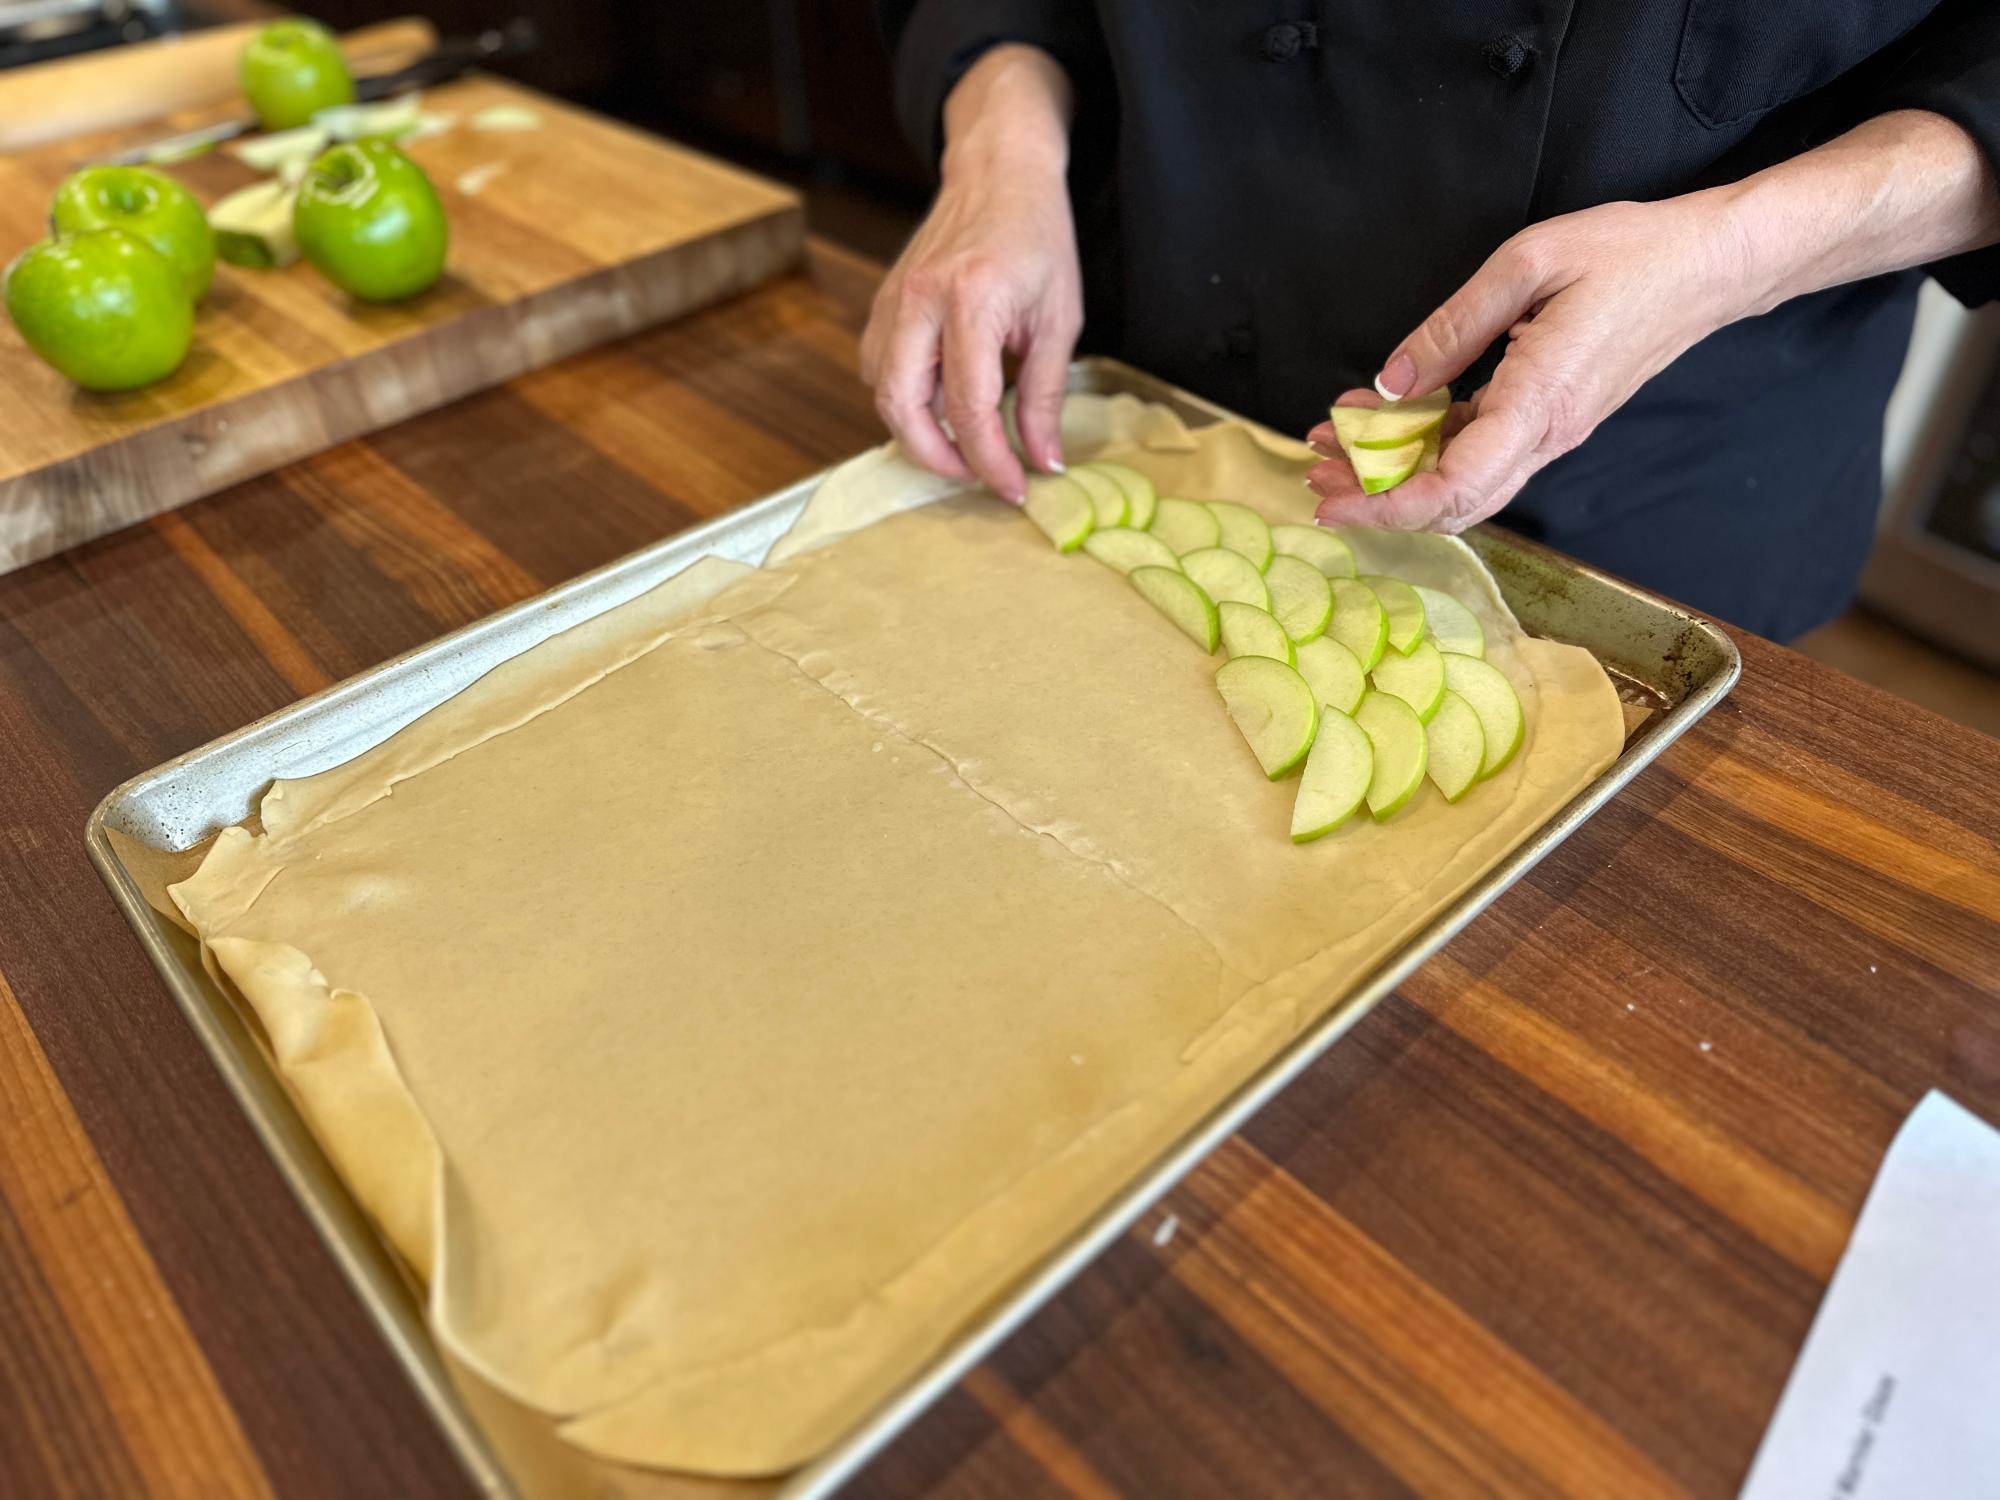 Layering apples on the dough.